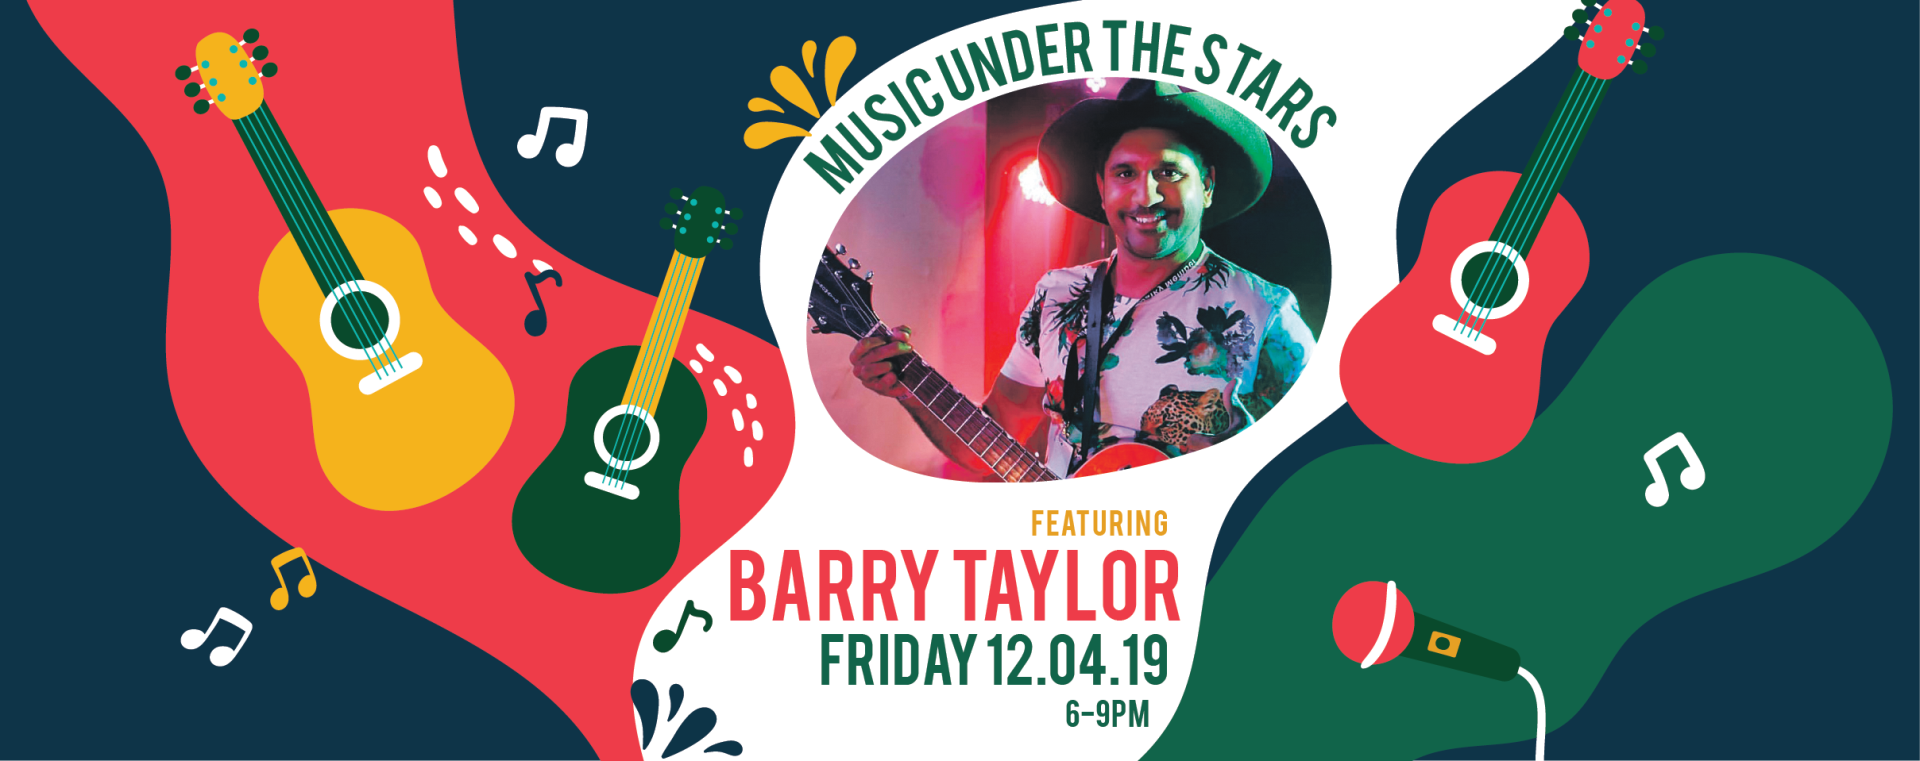 Music Under the Stars - Featuring Barry Taylor